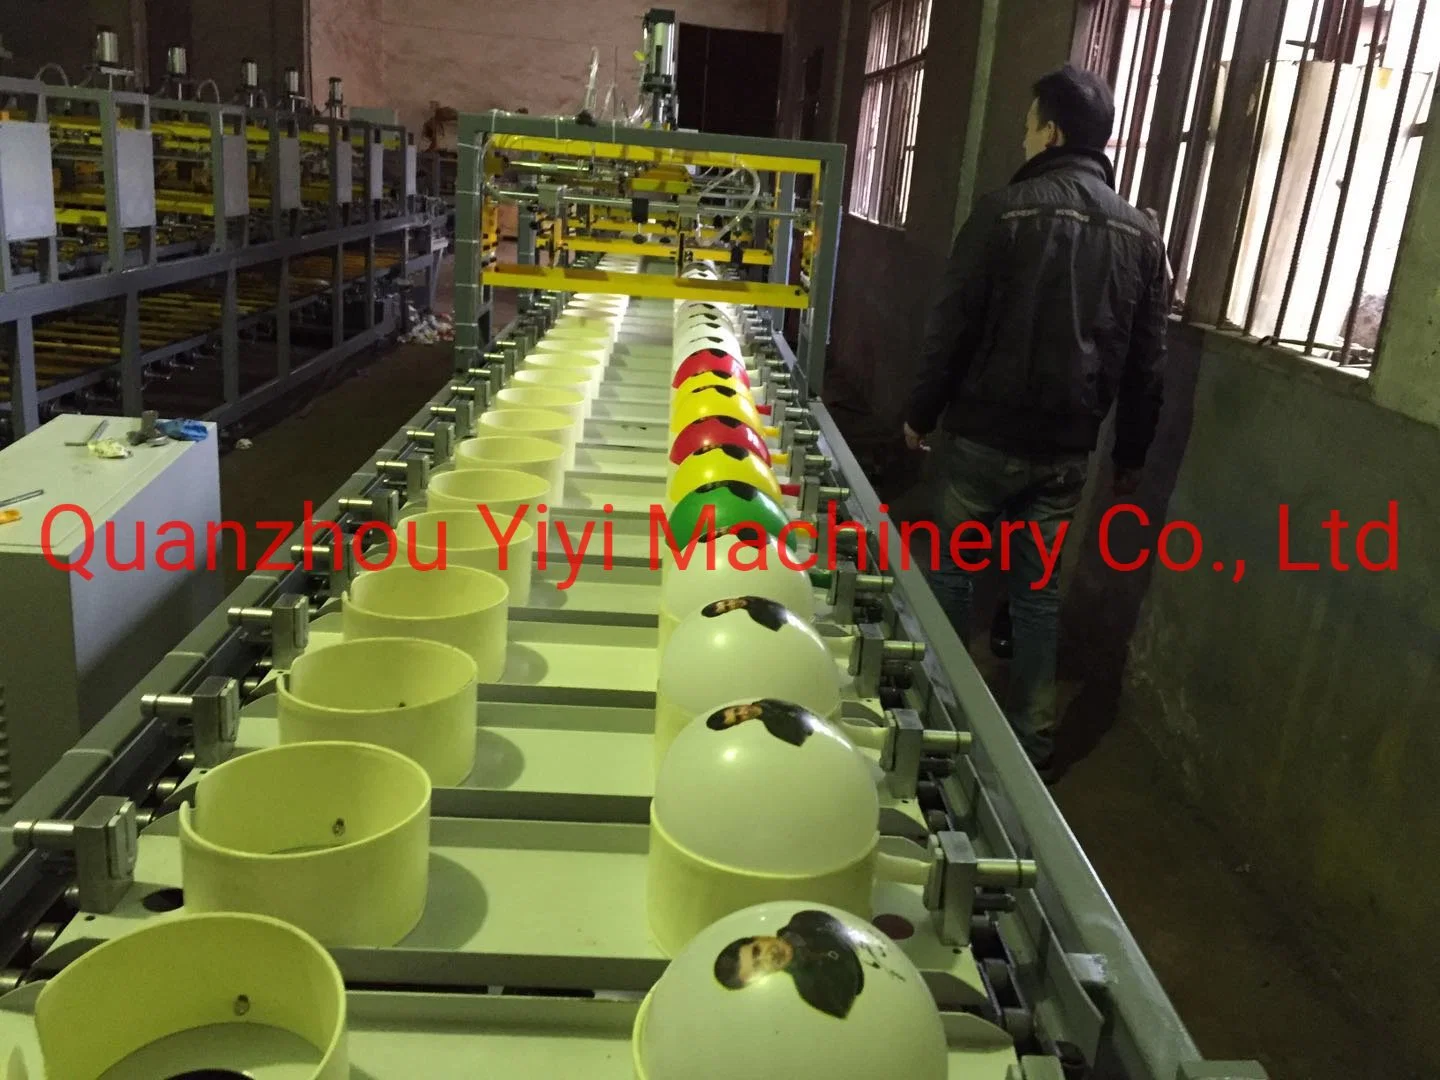 Factory Manufacturer Automatic Balloon Printing Machine for Wedding Decoration